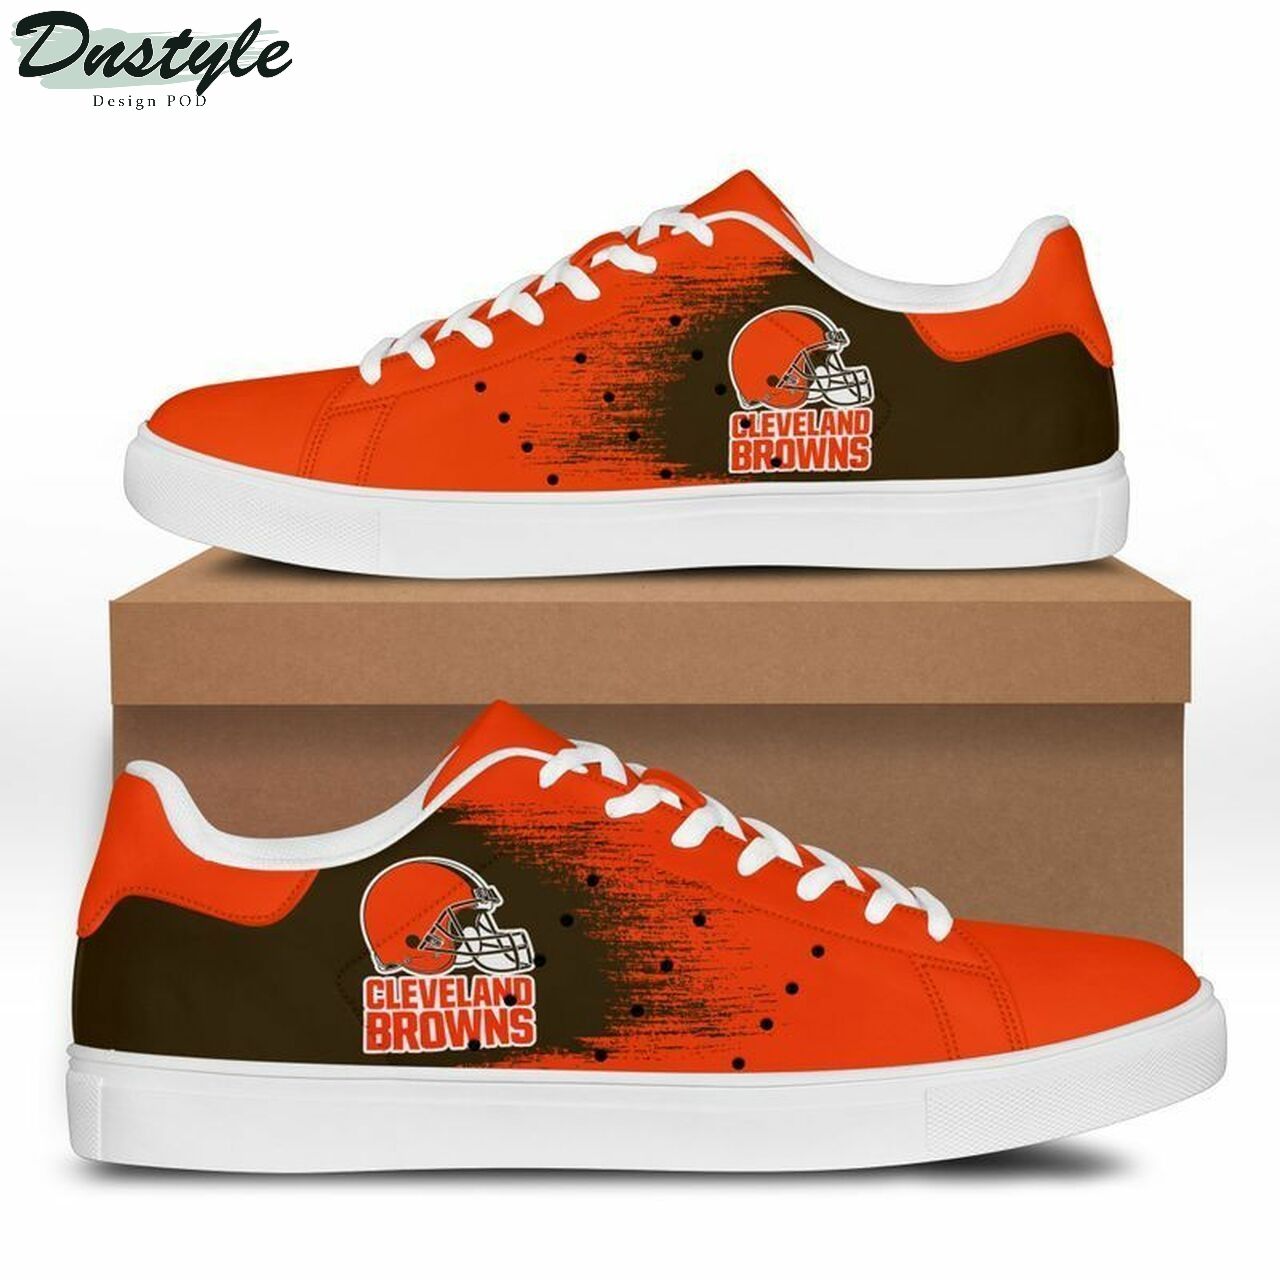 NFL Cleveland Browns stan smith low top skate shoes